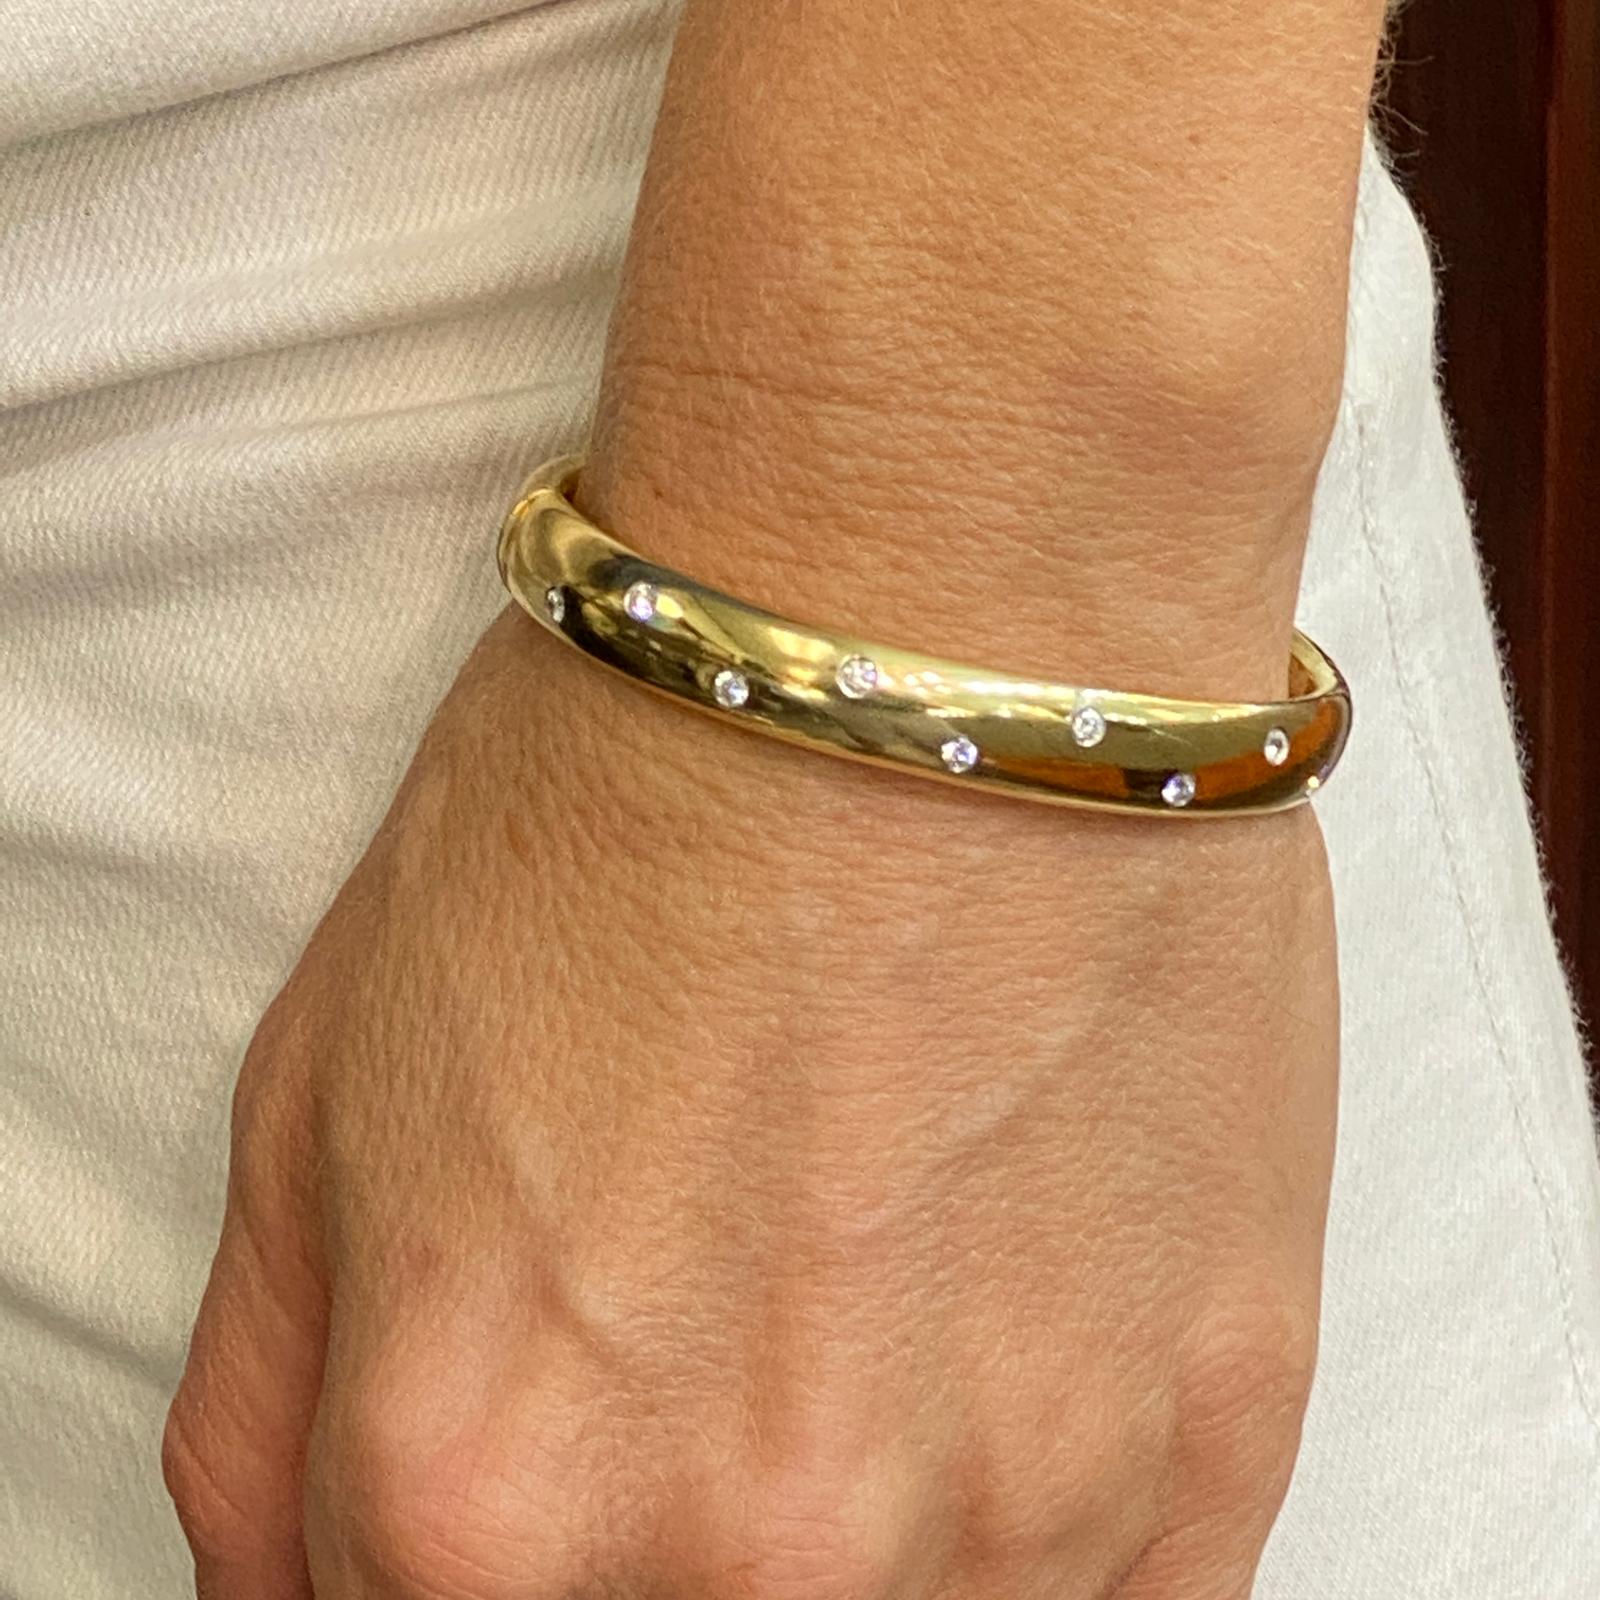 Simple and modern, the wide Etoile bangle is fashioned in 18 karat yellow gold.  The  bangle is punctuated with 10 round brilliant diamonds weighing approximately .50 carat total weight graded F-G/VS.  This elegant bangle is a timeless finishing